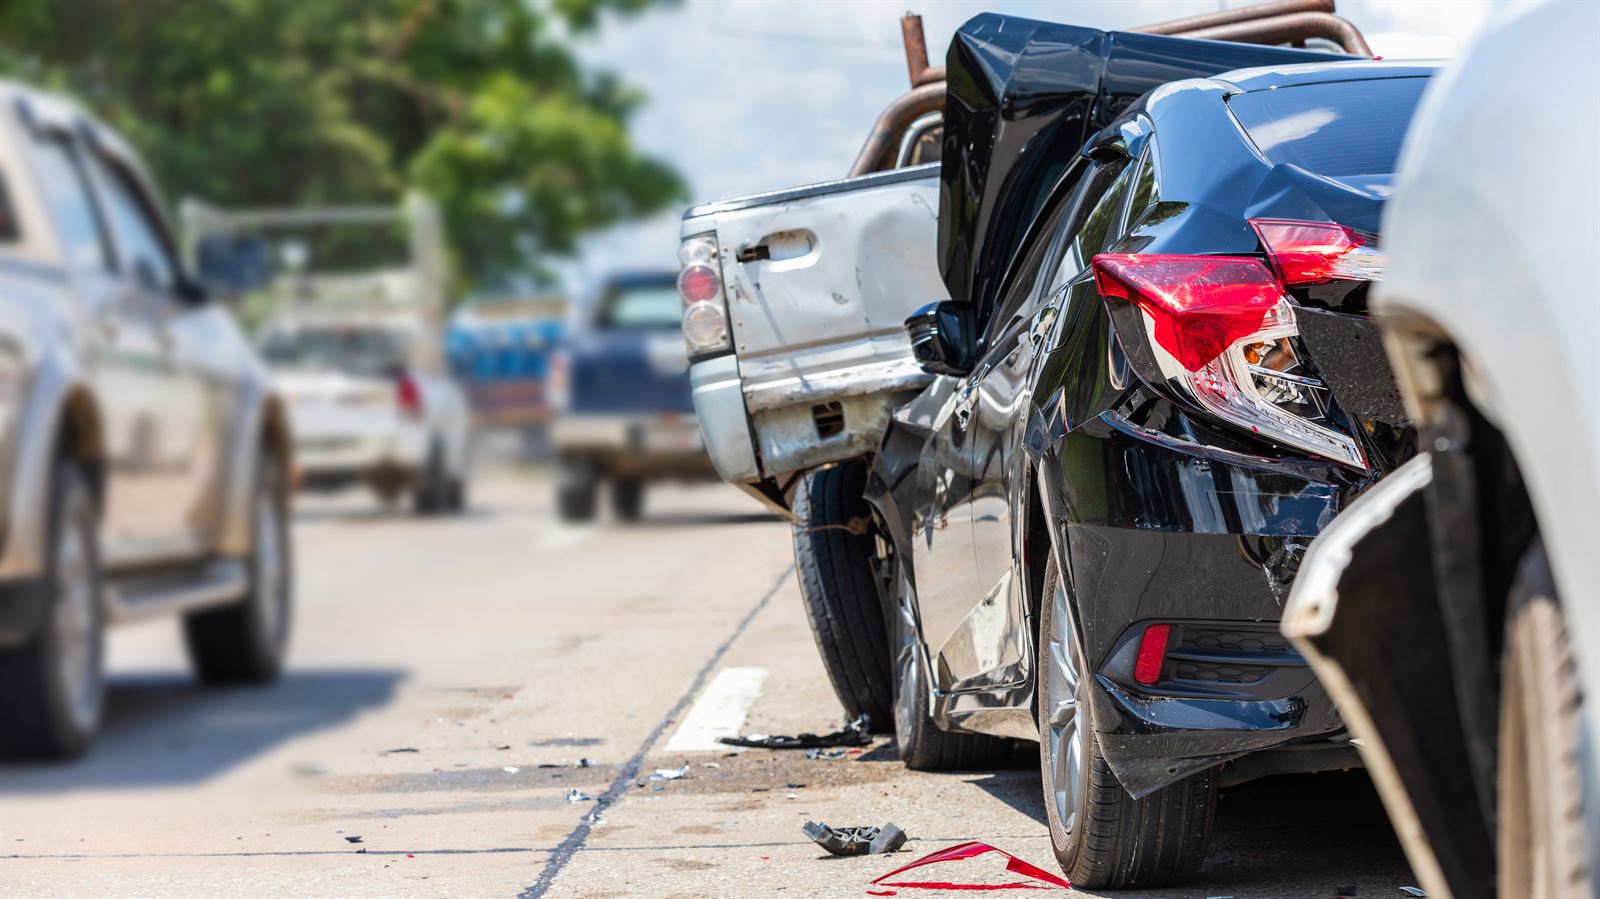 Demas Law Group P.C. Personal Injury s in Sacramento